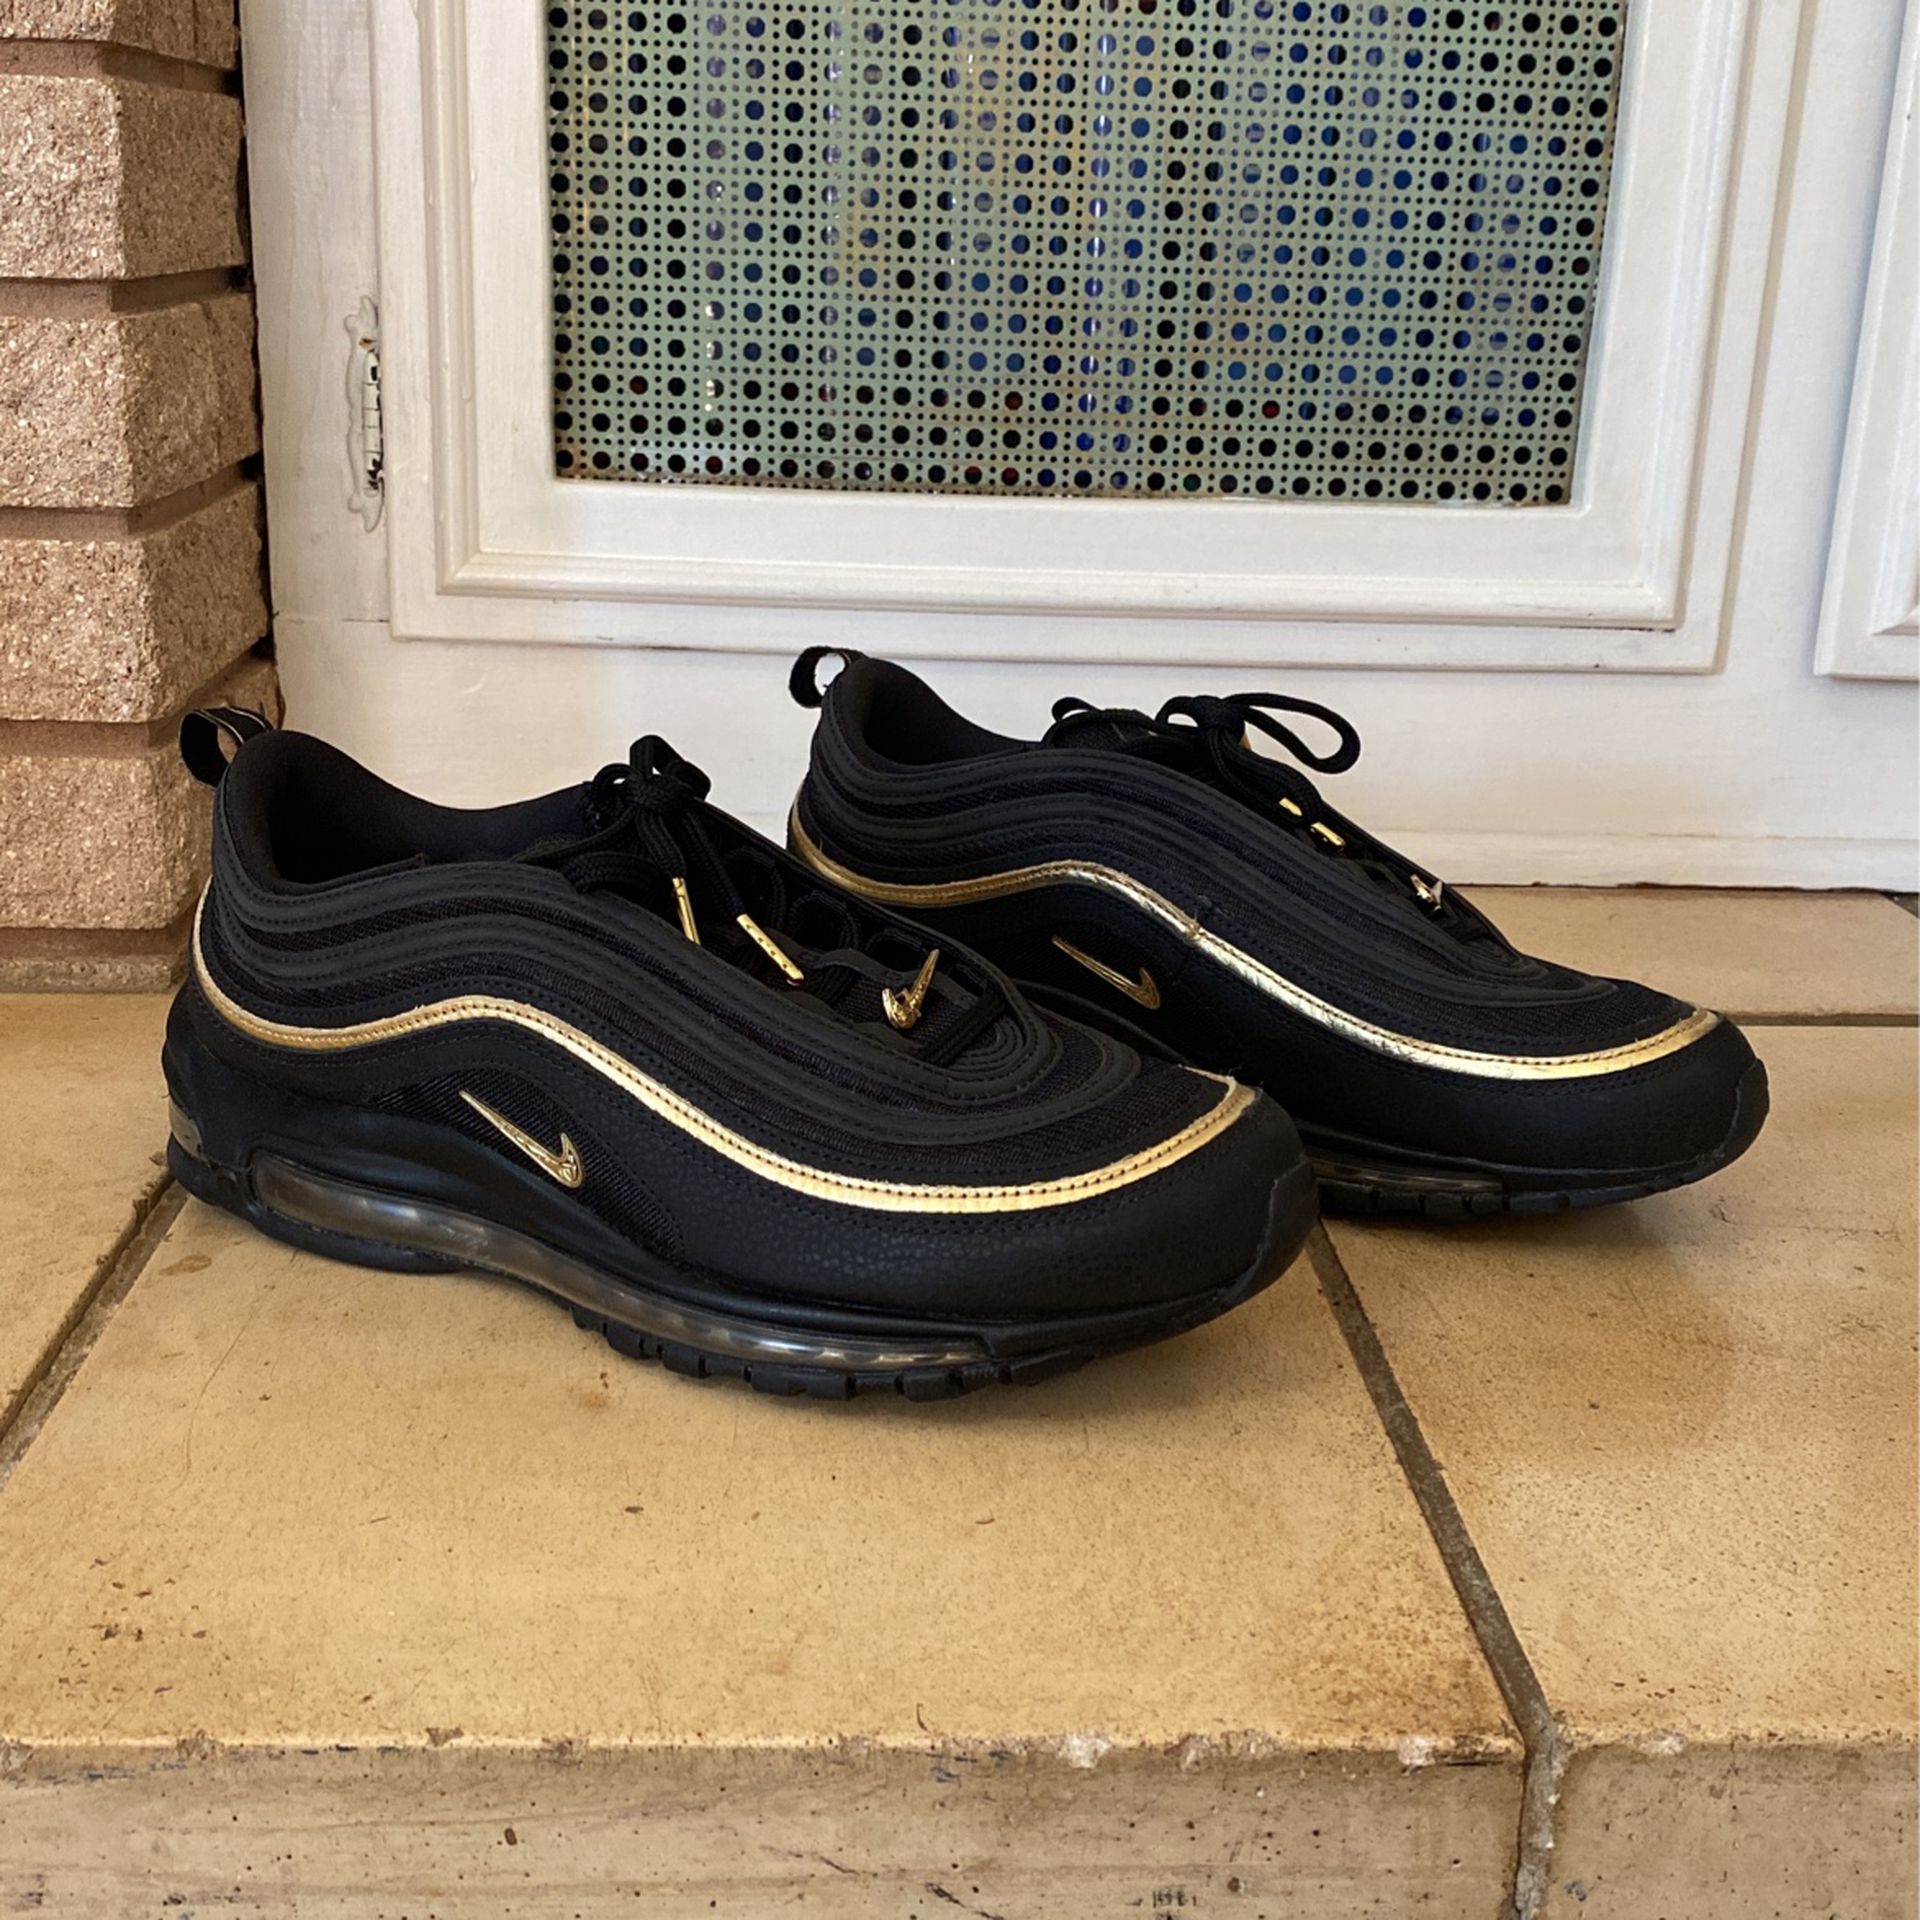 Air Max 97 for Sale in Longview, TX - OfferUp فروع الشجرة